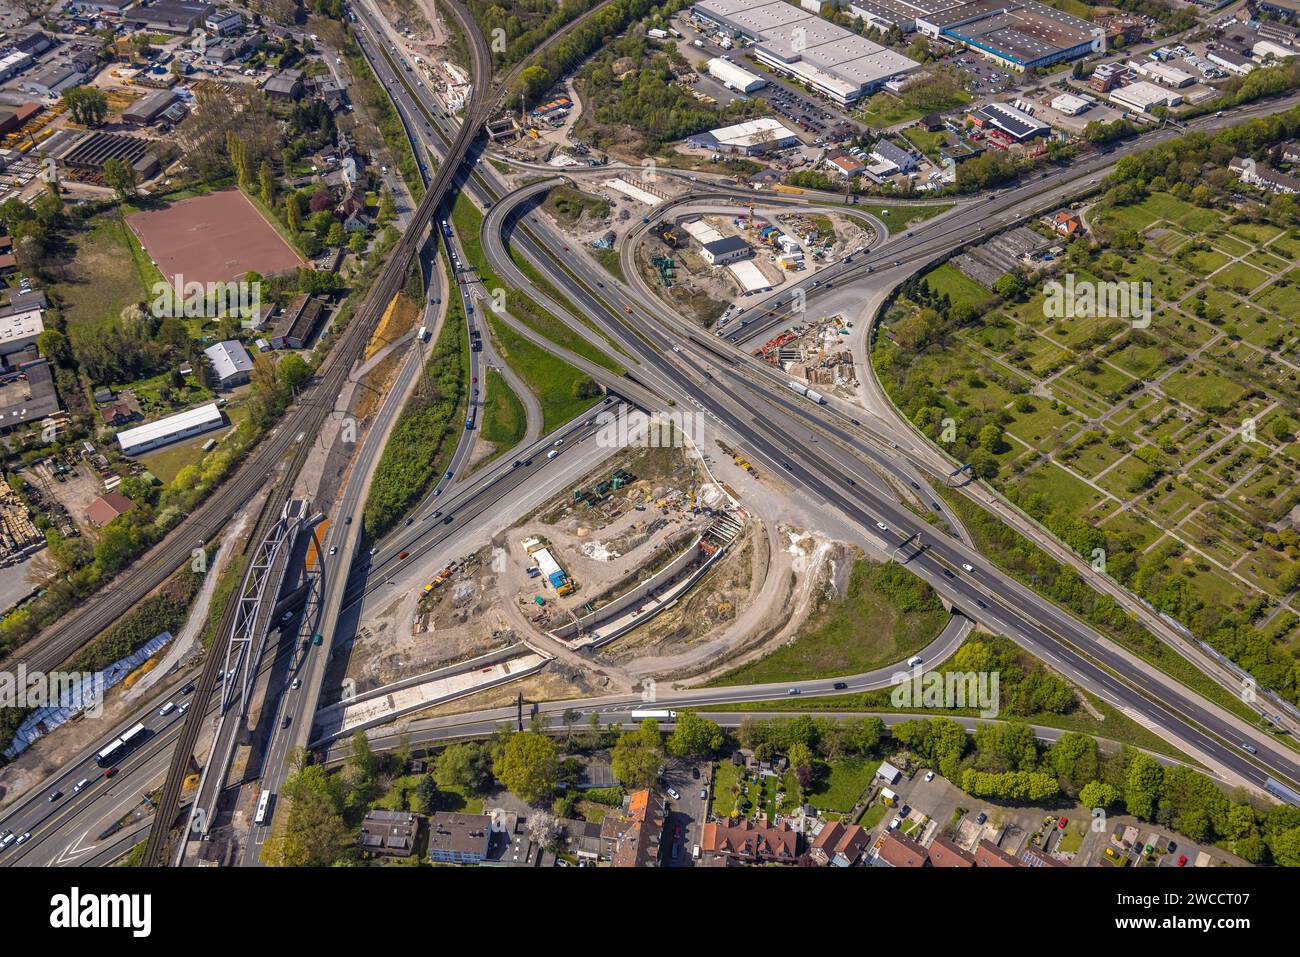 Aerial view, construction site at Herne interchange, A43 and A42 highways, tunnel construction, Baukau, Herne, Ruhr area, North Rhine-Westphalia, Germ Stock Photo